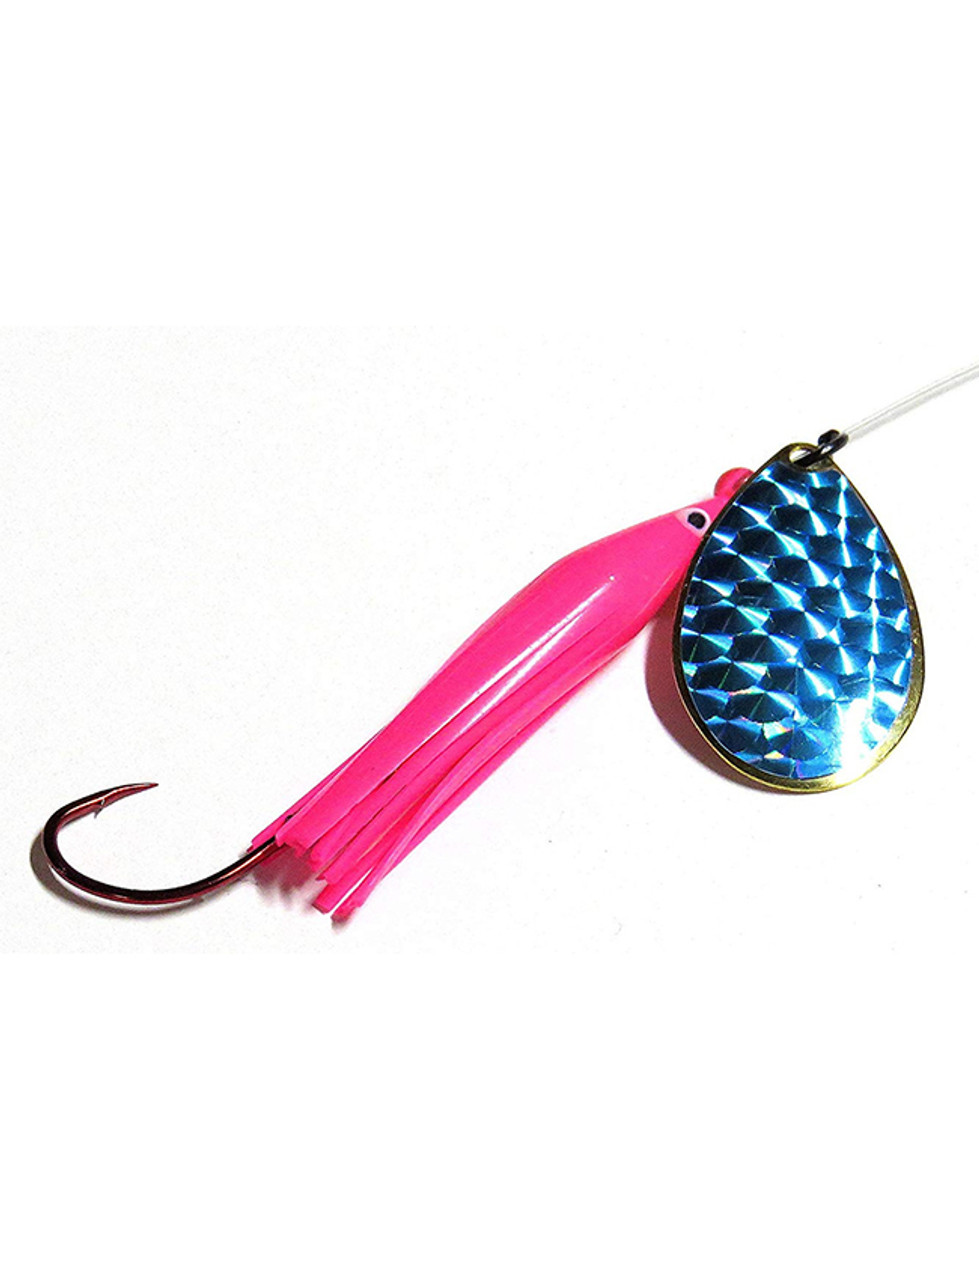 Wicked Lures King Killer - Pink Blue